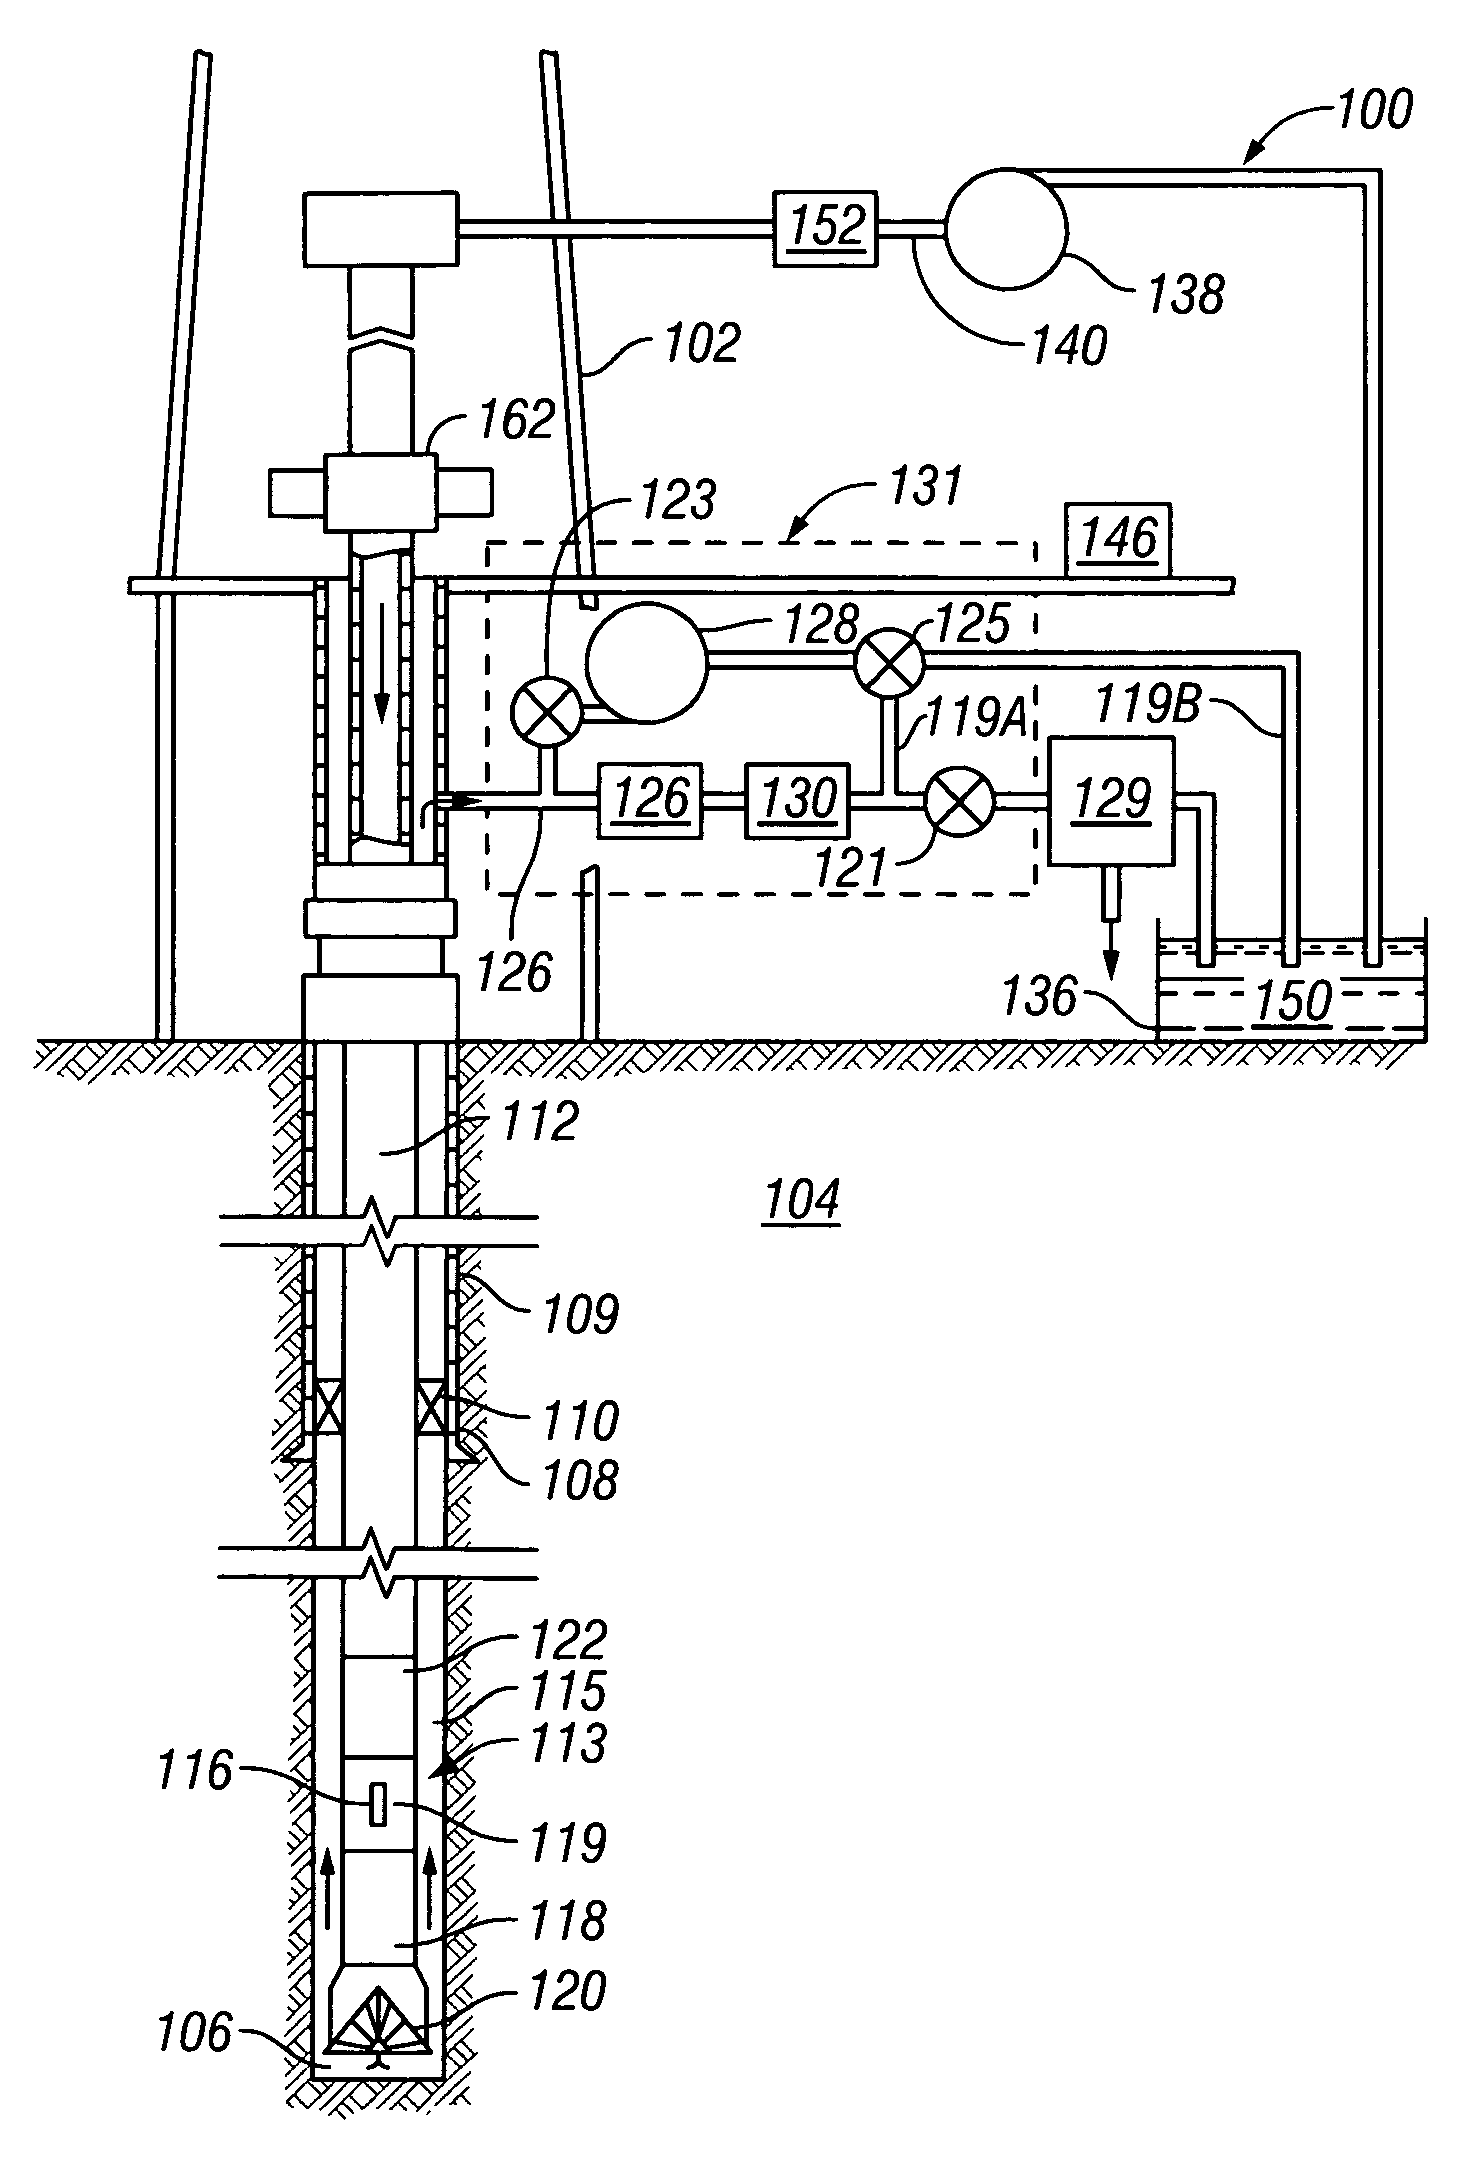 Method for determining formation fluid entry into or drilling fluid loss from a borehole using a dynamic annular pressure control system